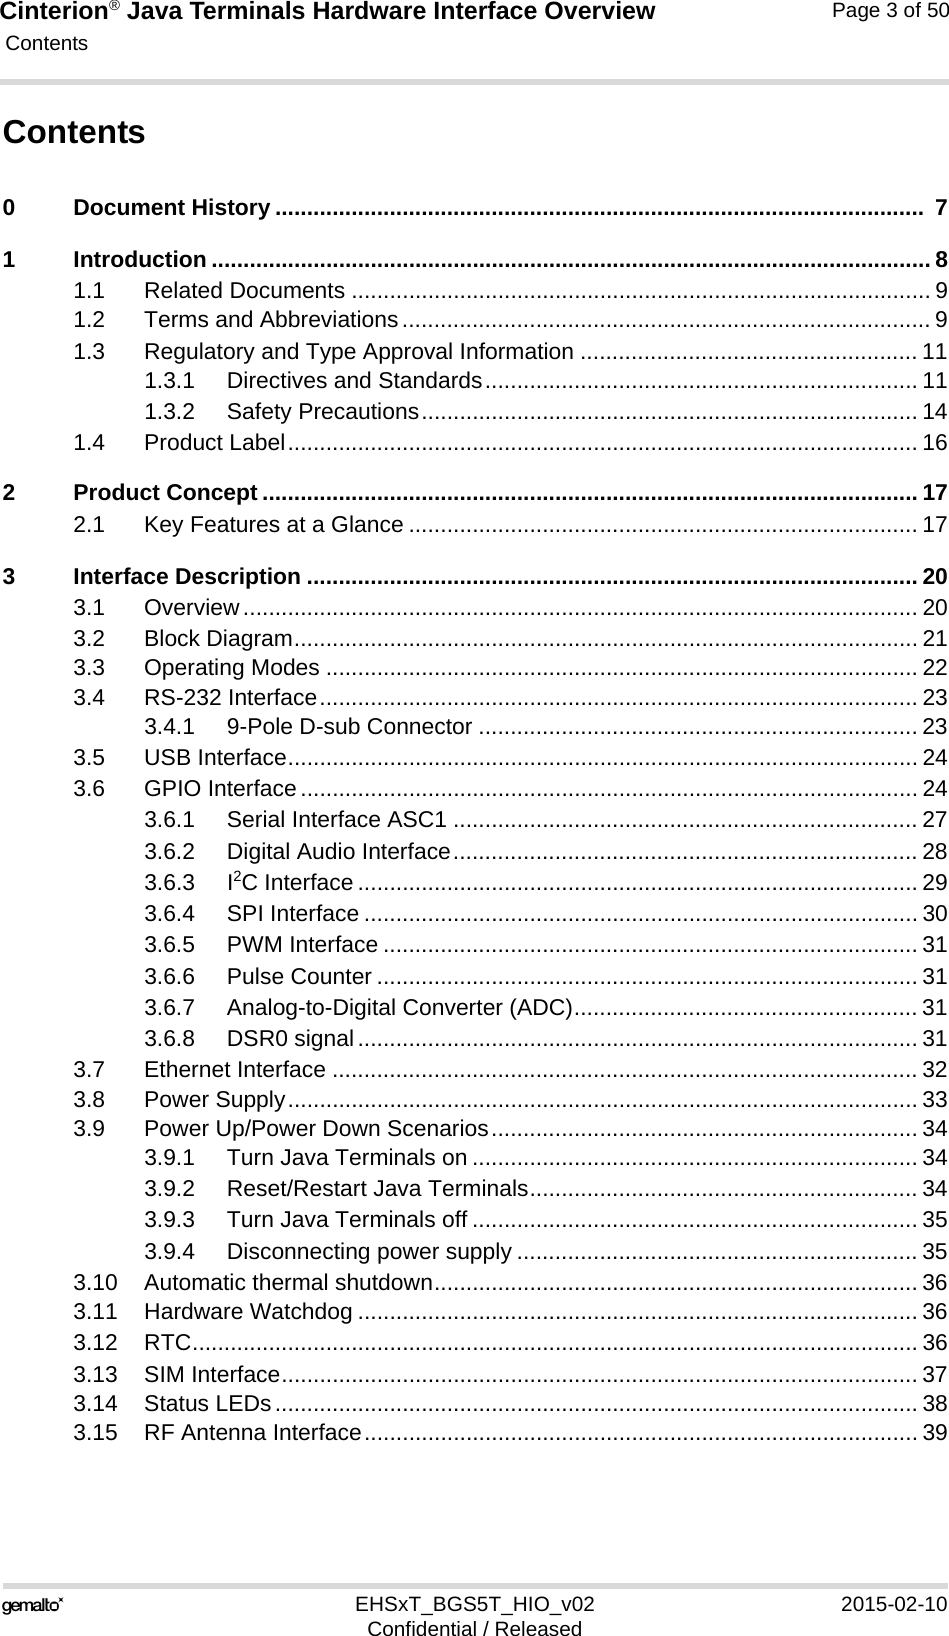 Cinterion® Java Terminals Hardware Interface Overview Contents119EHSxT_BGS5T_HIO_v02 2015-02-10Confidential / ReleasedPage 3 of 50Contents0 Document History ......................................................................................................  71 Introduction ................................................................................................................. 81.1 Related Documents ........................................................................................... 91.2 Terms and Abbreviations................................................................................... 91.3 Regulatory and Type Approval Information ..................................................... 111.3.1 Directives and Standards.................................................................... 111.3.2 Safety Precautions.............................................................................. 141.4 Product Label................................................................................................... 162 Product Concept ....................................................................................................... 172.1 Key Features at a Glance ................................................................................ 173 Interface Description ................................................................................................ 203.1 Overview.......................................................................................................... 203.2 Block Diagram.................................................................................................. 213.3 Operating Modes ............................................................................................. 223.4 RS-232 Interface.............................................................................................. 233.4.1 9-Pole D-sub Connector ..................................................................... 233.5 USB Interface................................................................................................... 243.6 GPIO Interface................................................................................................. 243.6.1 Serial Interface ASC1 ......................................................................... 273.6.2 Digital Audio Interface......................................................................... 283.6.3 I2C Interface ........................................................................................ 293.6.4 SPI Interface ....................................................................................... 303.6.5 PWM Interface .................................................................................... 313.6.6 Pulse Counter ..................................................................................... 313.6.7 Analog-to-Digital Converter (ADC)...................................................... 313.6.8 DSR0 signal........................................................................................ 313.7 Ethernet Interface ............................................................................................ 323.8 Power Supply................................................................................................... 333.9 Power Up/Power Down Scenarios................................................................... 343.9.1 Turn Java Terminals on ...................................................................... 343.9.2 Reset/Restart Java Terminals............................................................. 343.9.3 Turn Java Terminals off ...................................................................... 353.9.4 Disconnecting power supply ............................................................... 353.10 Automatic thermal shutdown............................................................................ 363.11 Hardware Watchdog ........................................................................................ 363.12 RTC.................................................................................................................. 363.13 SIM Interface.................................................................................................... 373.14 Status LEDs..................................................................................................... 383.15 RF Antenna Interface....................................................................................... 39